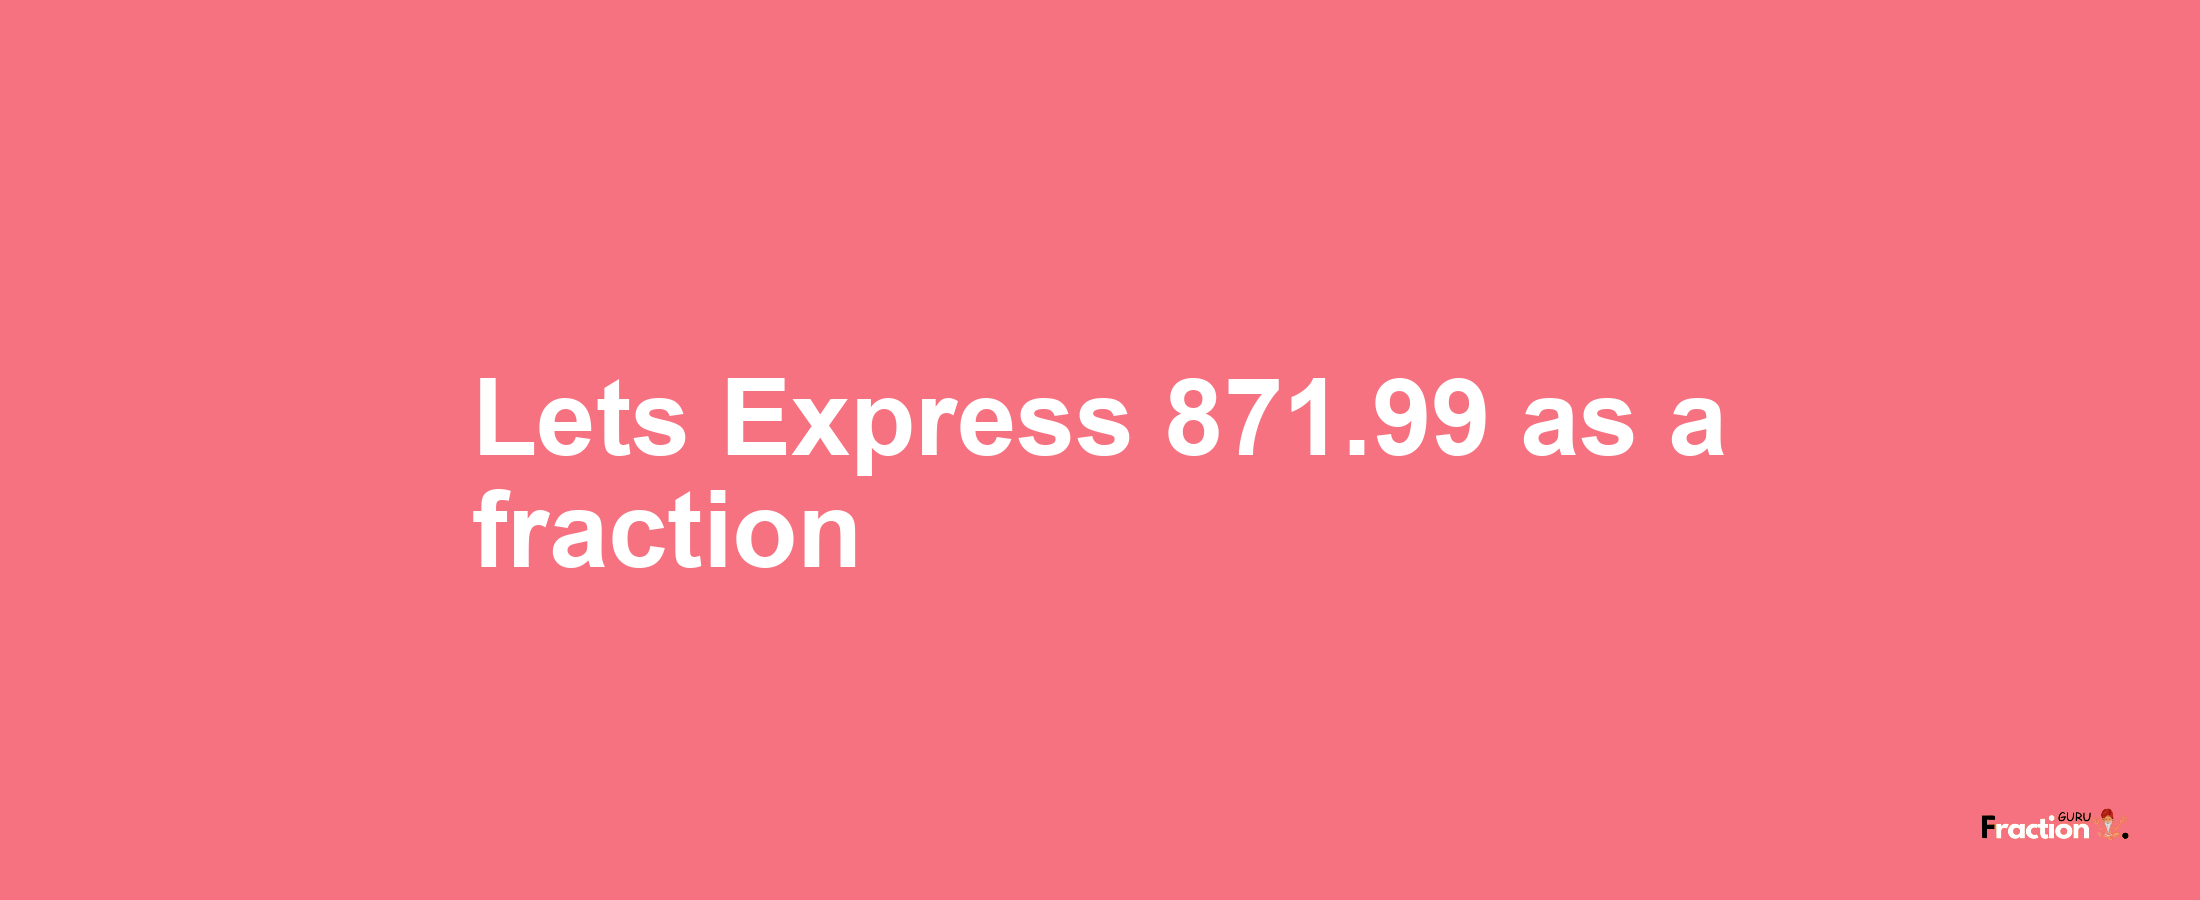 Lets Express 871.99 as afraction